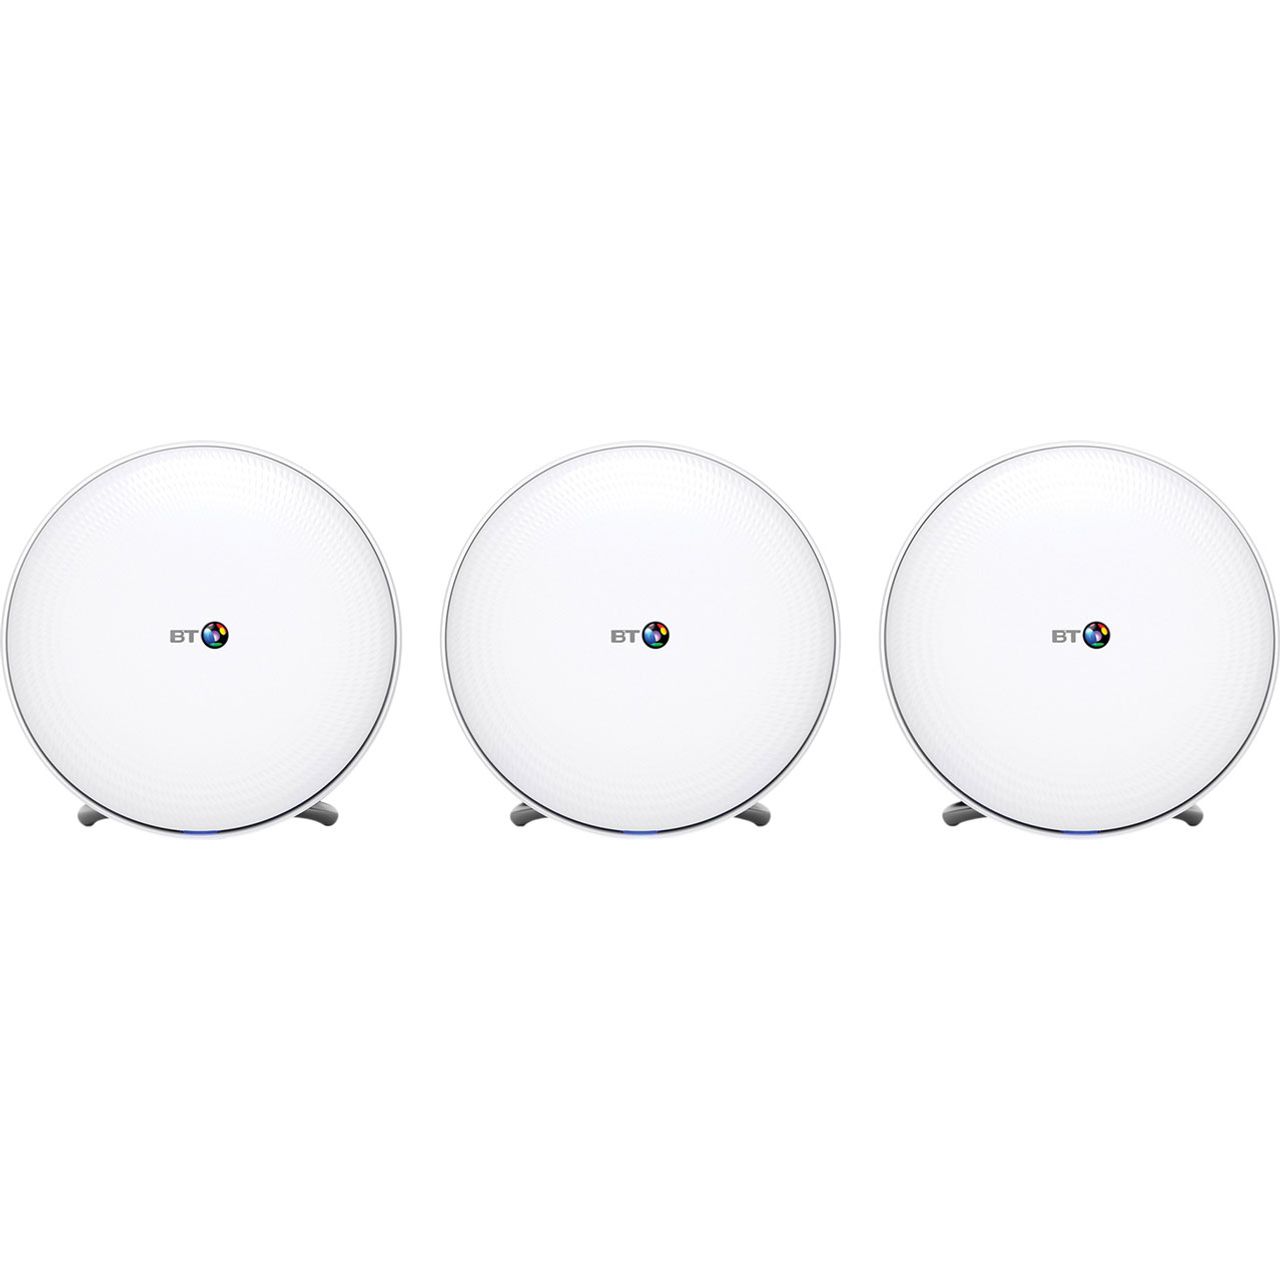 BT Whole Home WiFi (3-Pack) for Mesh Network Review